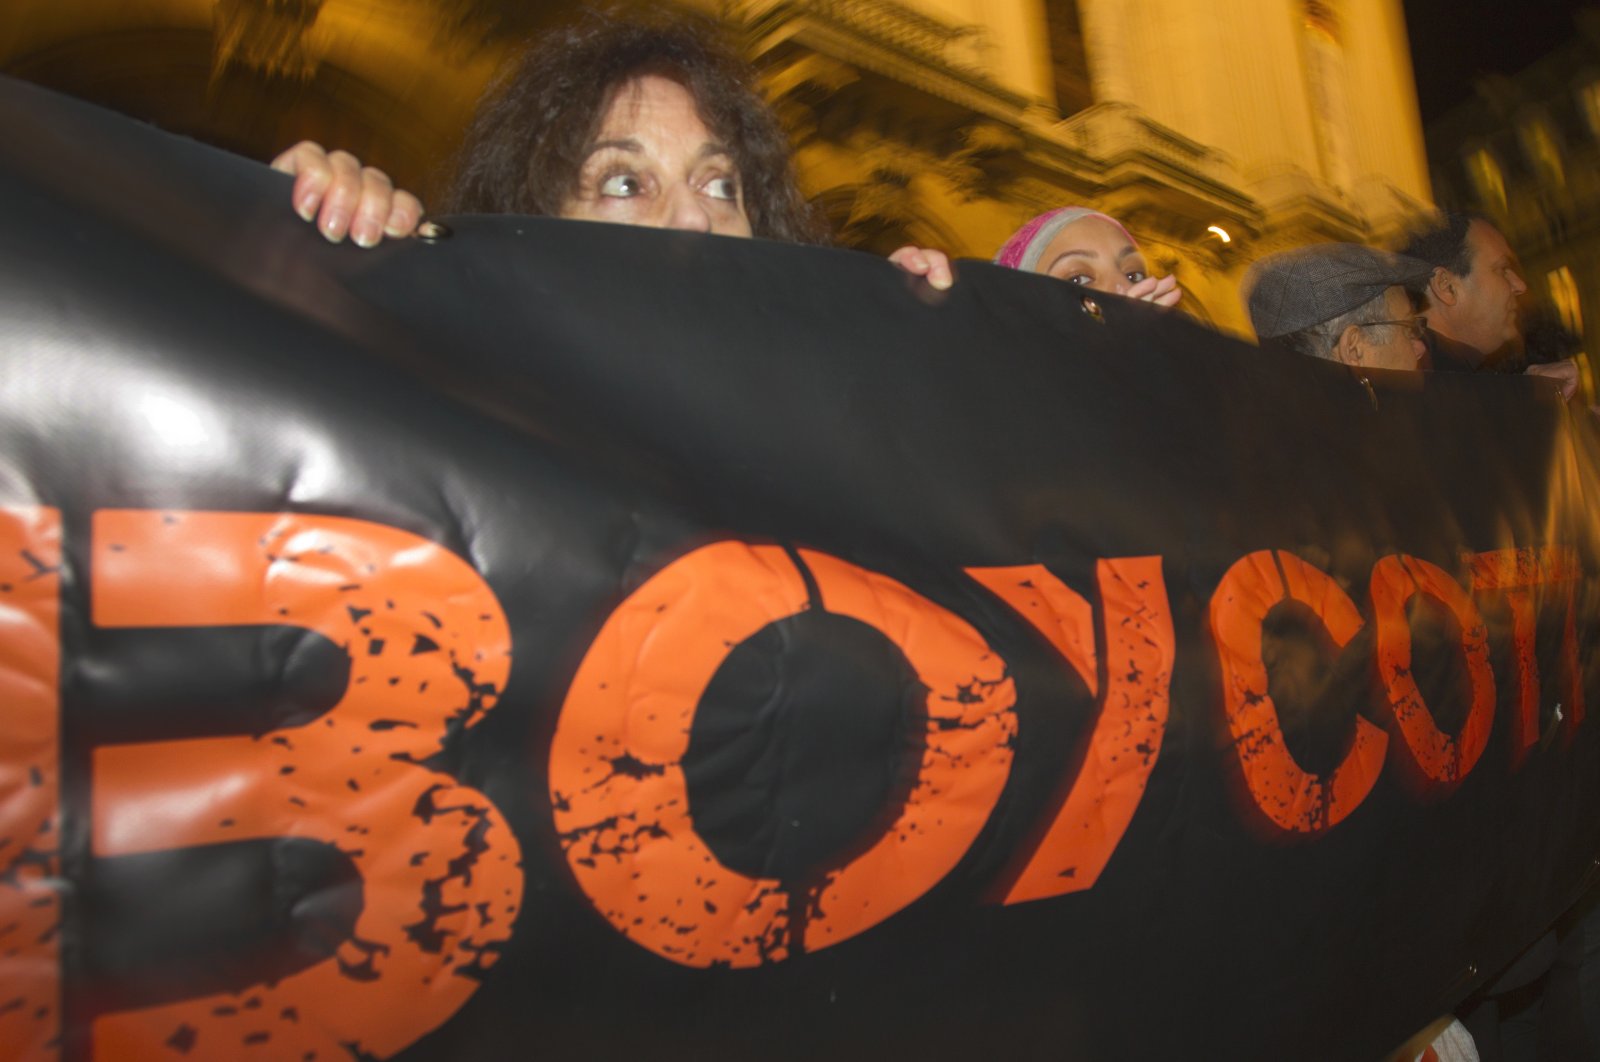 French demonstrators and supporters of the BDS movement hold a placard with the word "Boycott" during a demonstration in Paris, France, Oct. 31, 2012. (AP Photo)